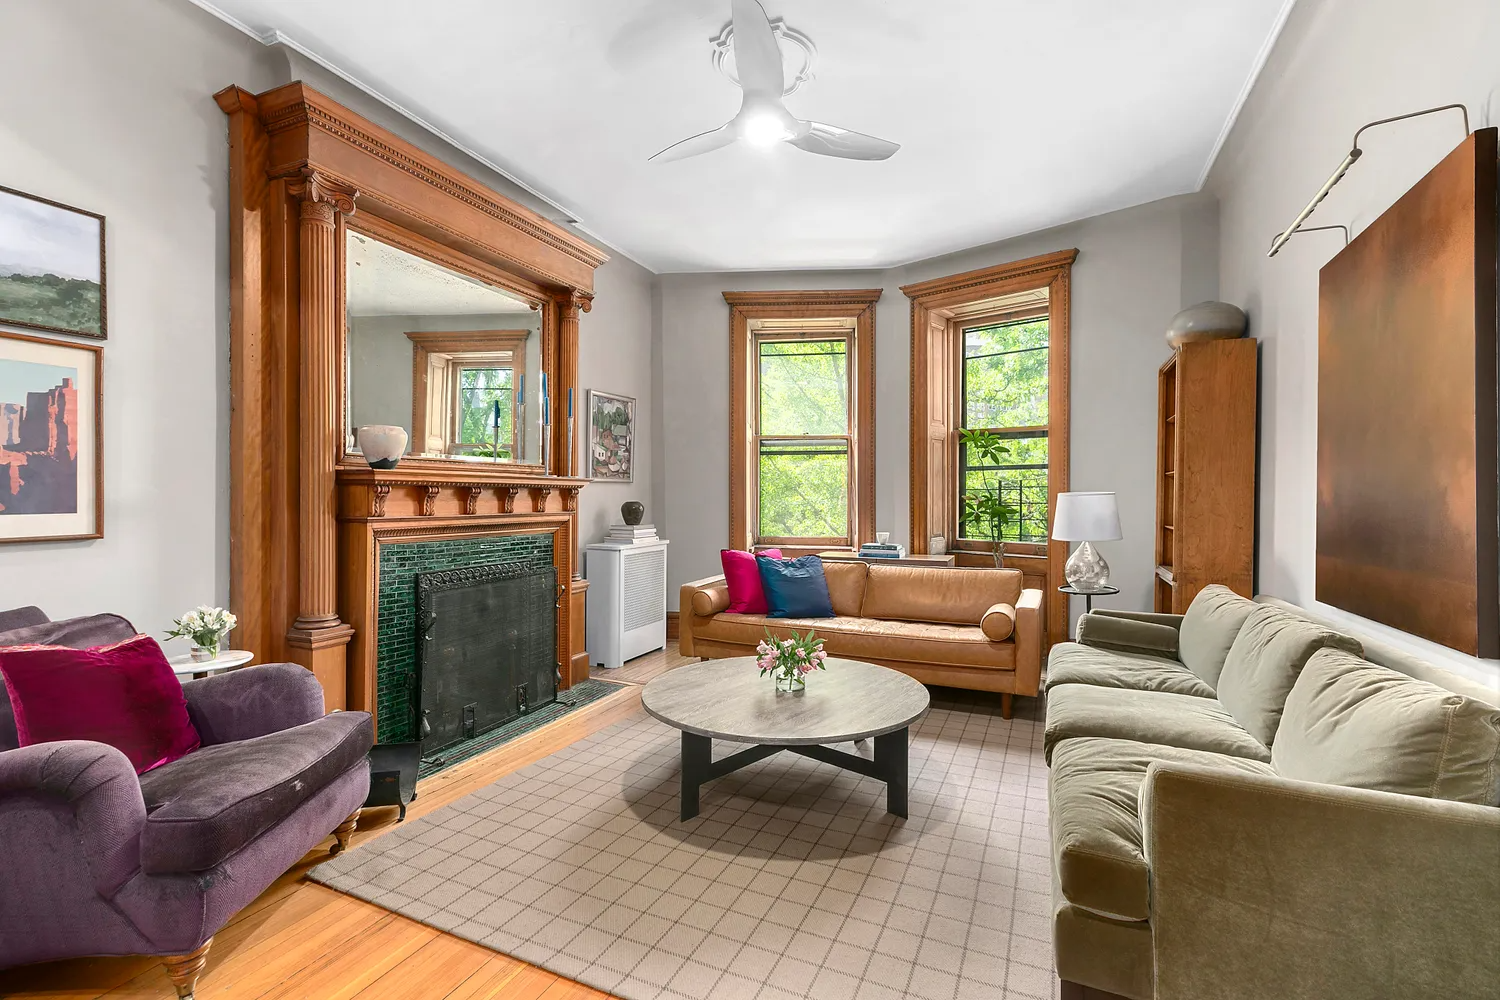 brooklyn listing - living room with a wood mantel with green tile surround